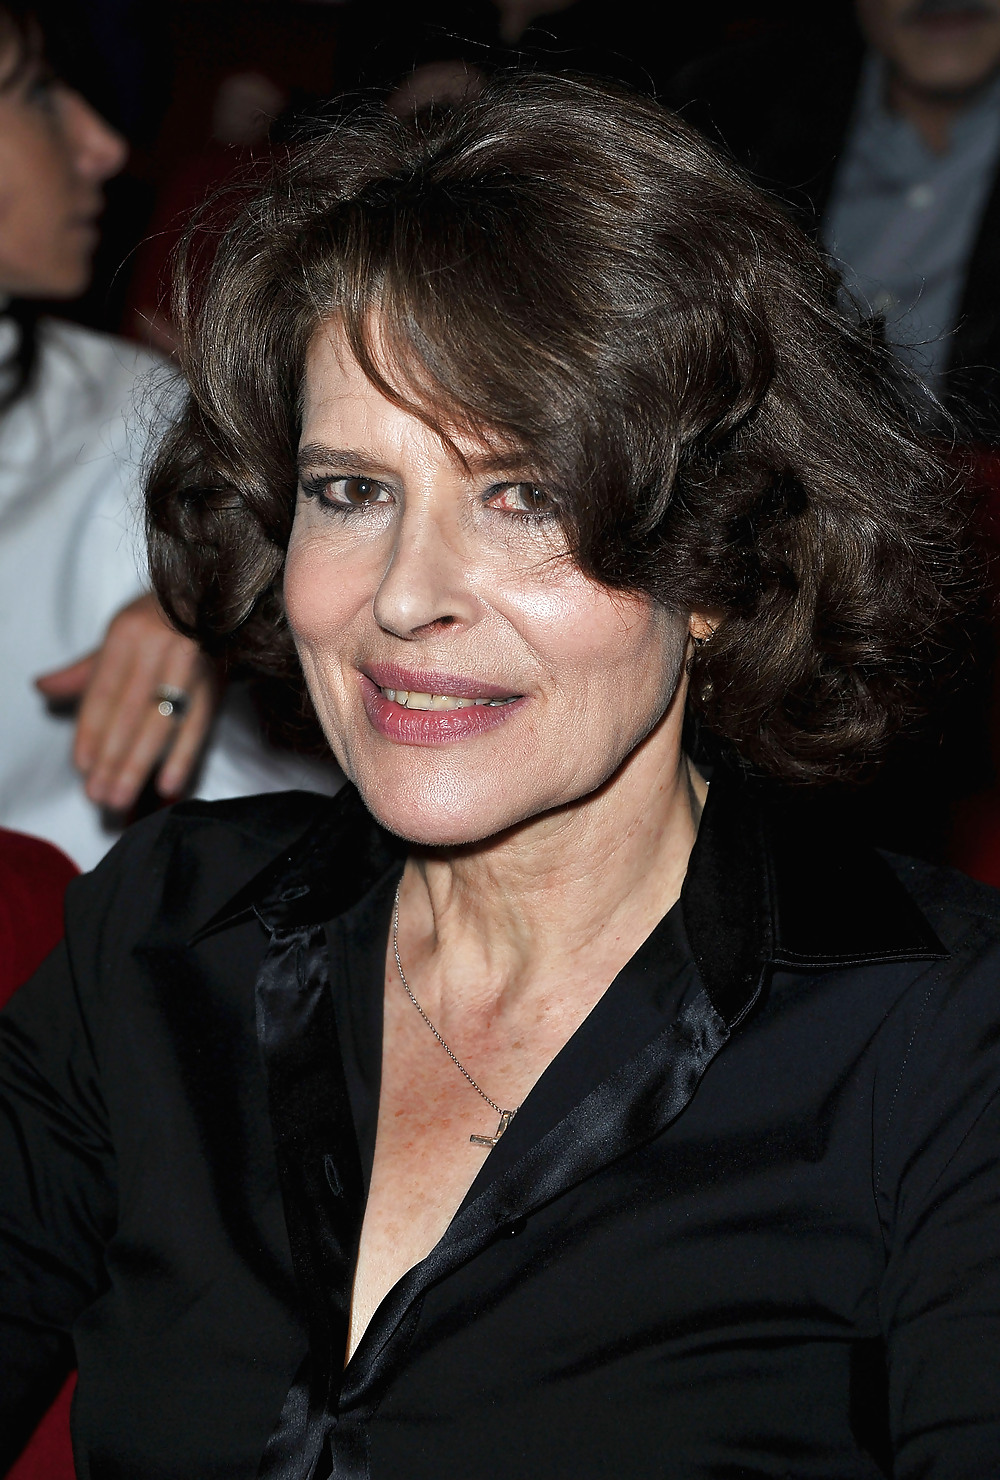 Fanny Ardant - Hot & Mature French Actress #18694117